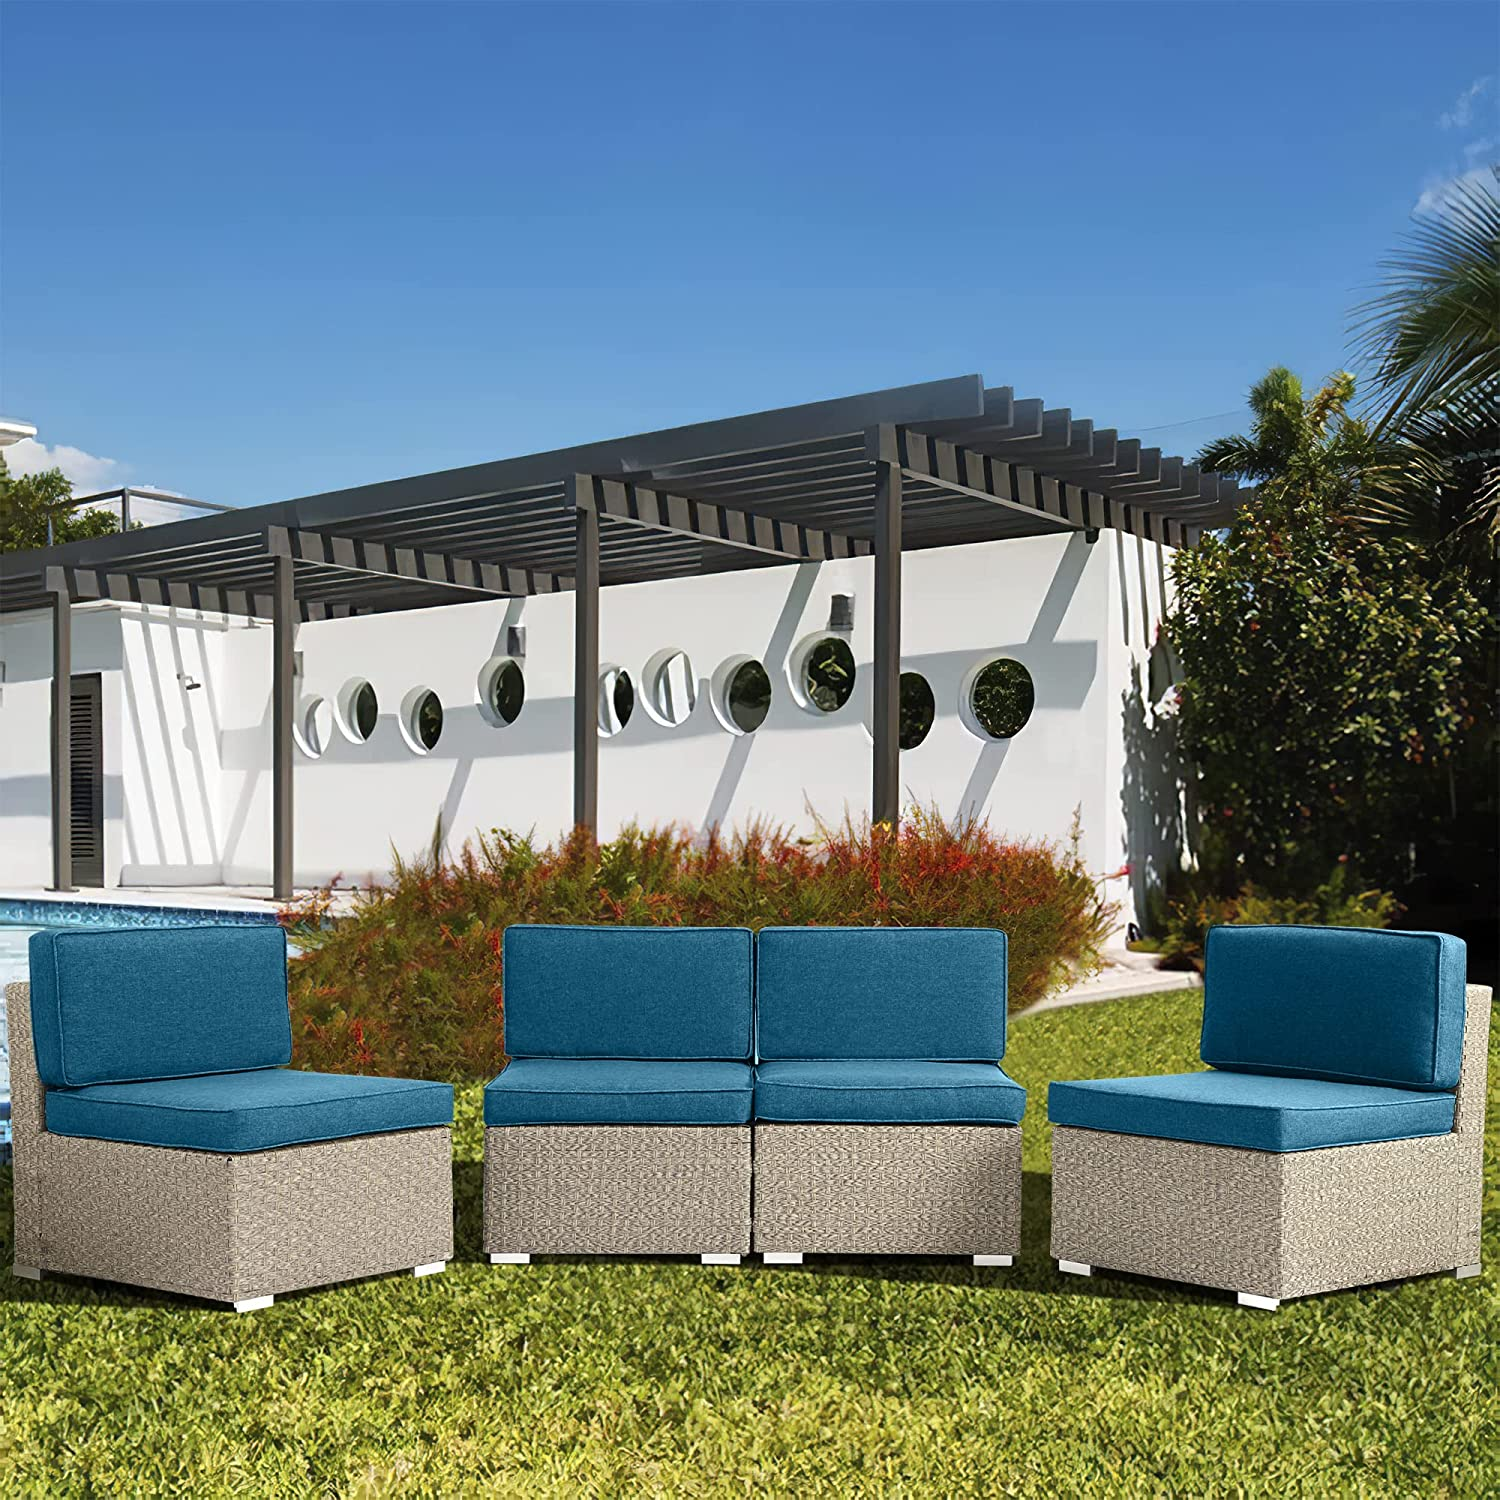 KIGOTY 4-Pieces Rattan Wicker Chairs Set of 4 Patio Chairs All Weather Dinning Chair Garden Chair with Thick Cushions, Peacock Blue - image 2 of 7